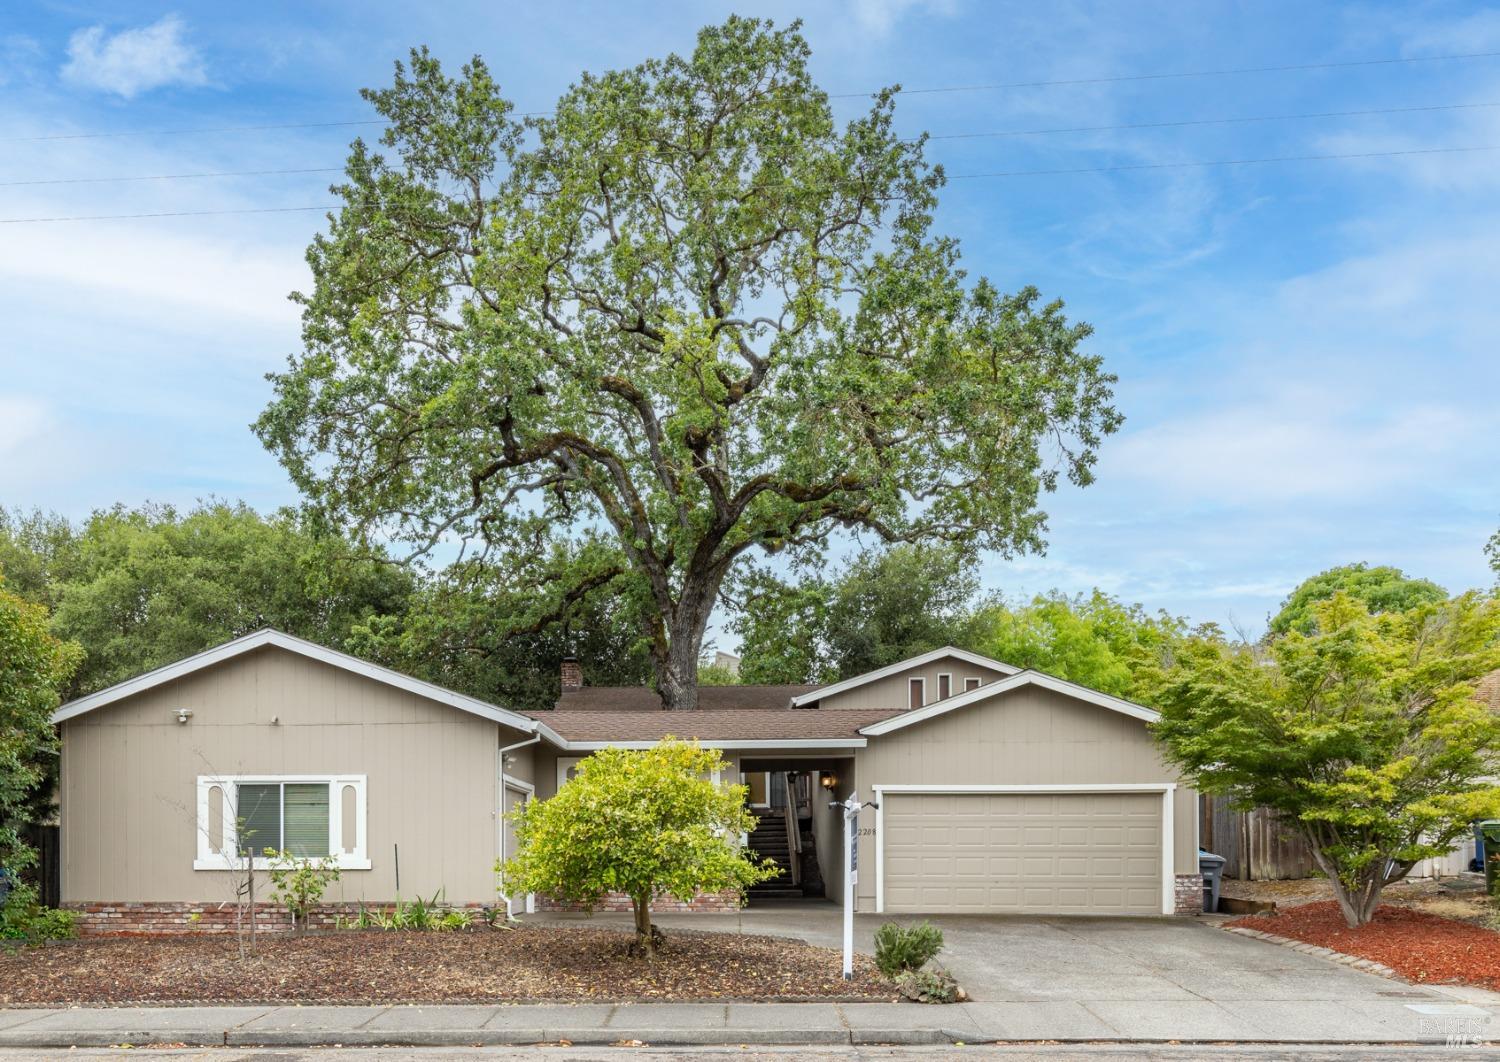 Welcome to 2208-2210 Mesquite Drive, Santa Rosa, CA.  2 separate homes on a single lot.